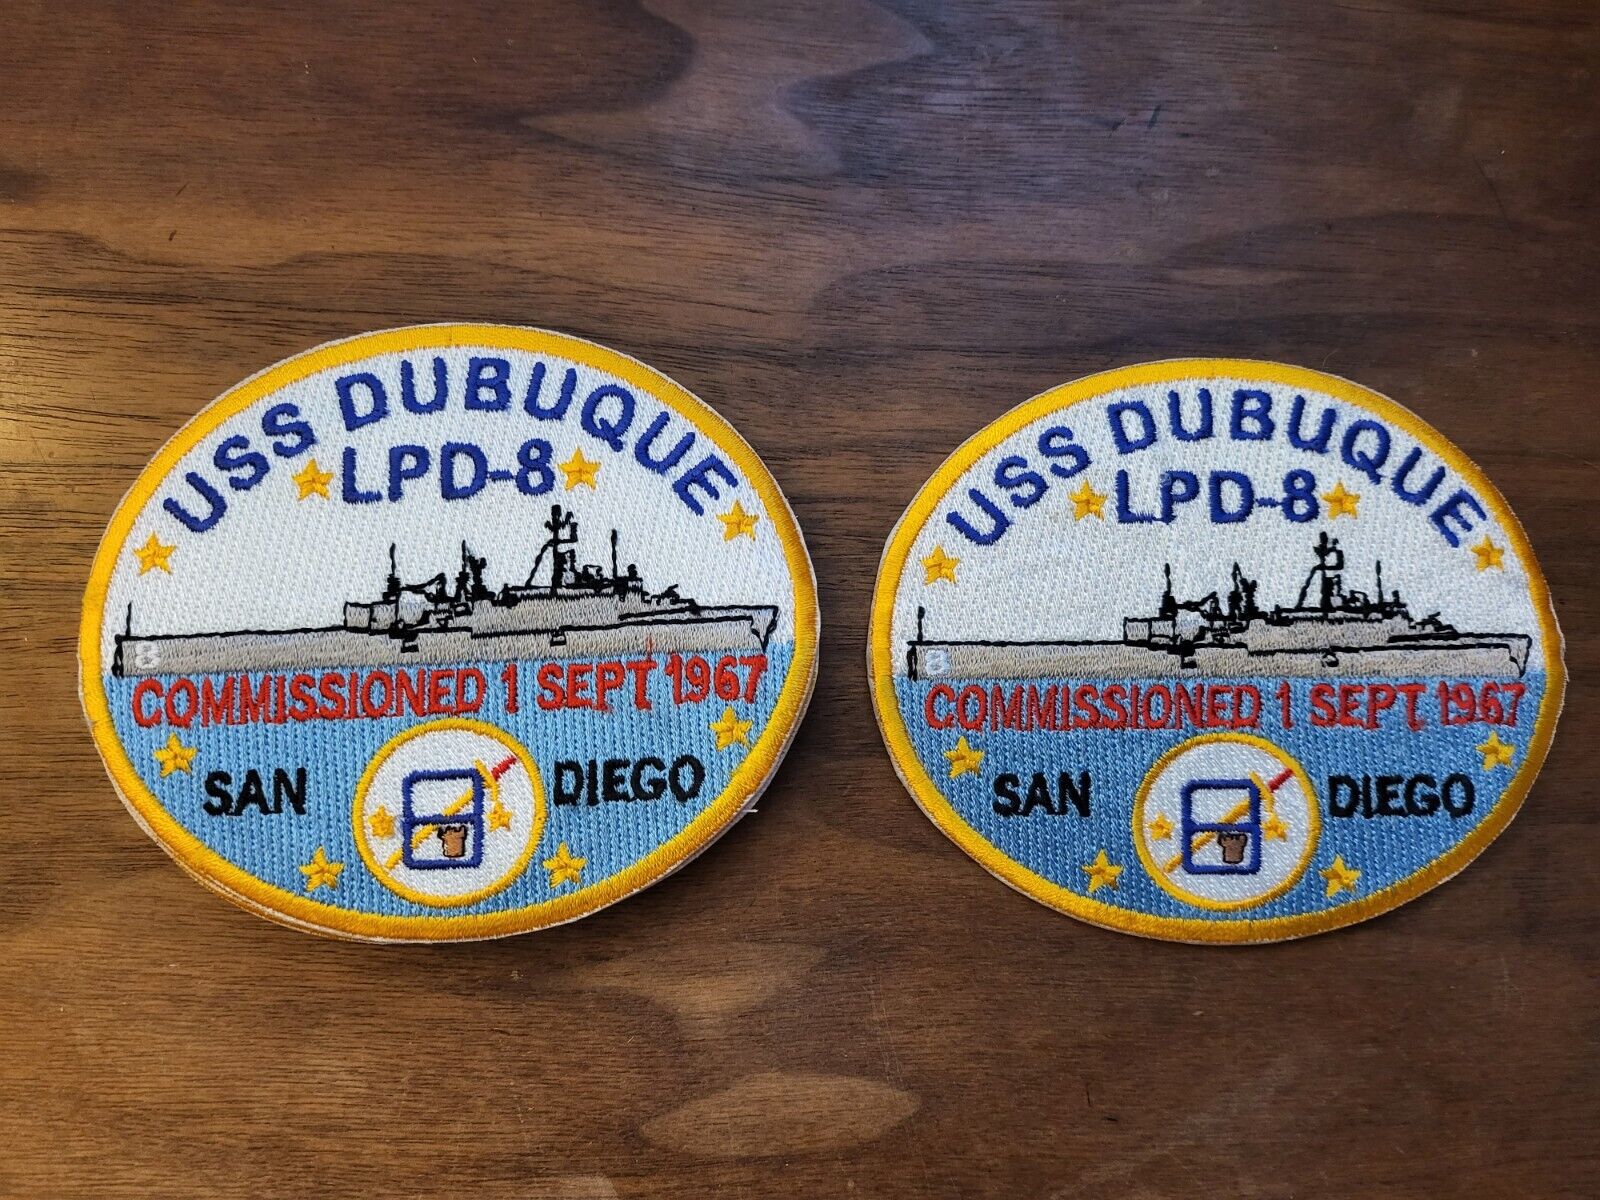 USS DUBUQUE, LPD-8, COMMISSIONED 1 SEPT 1967